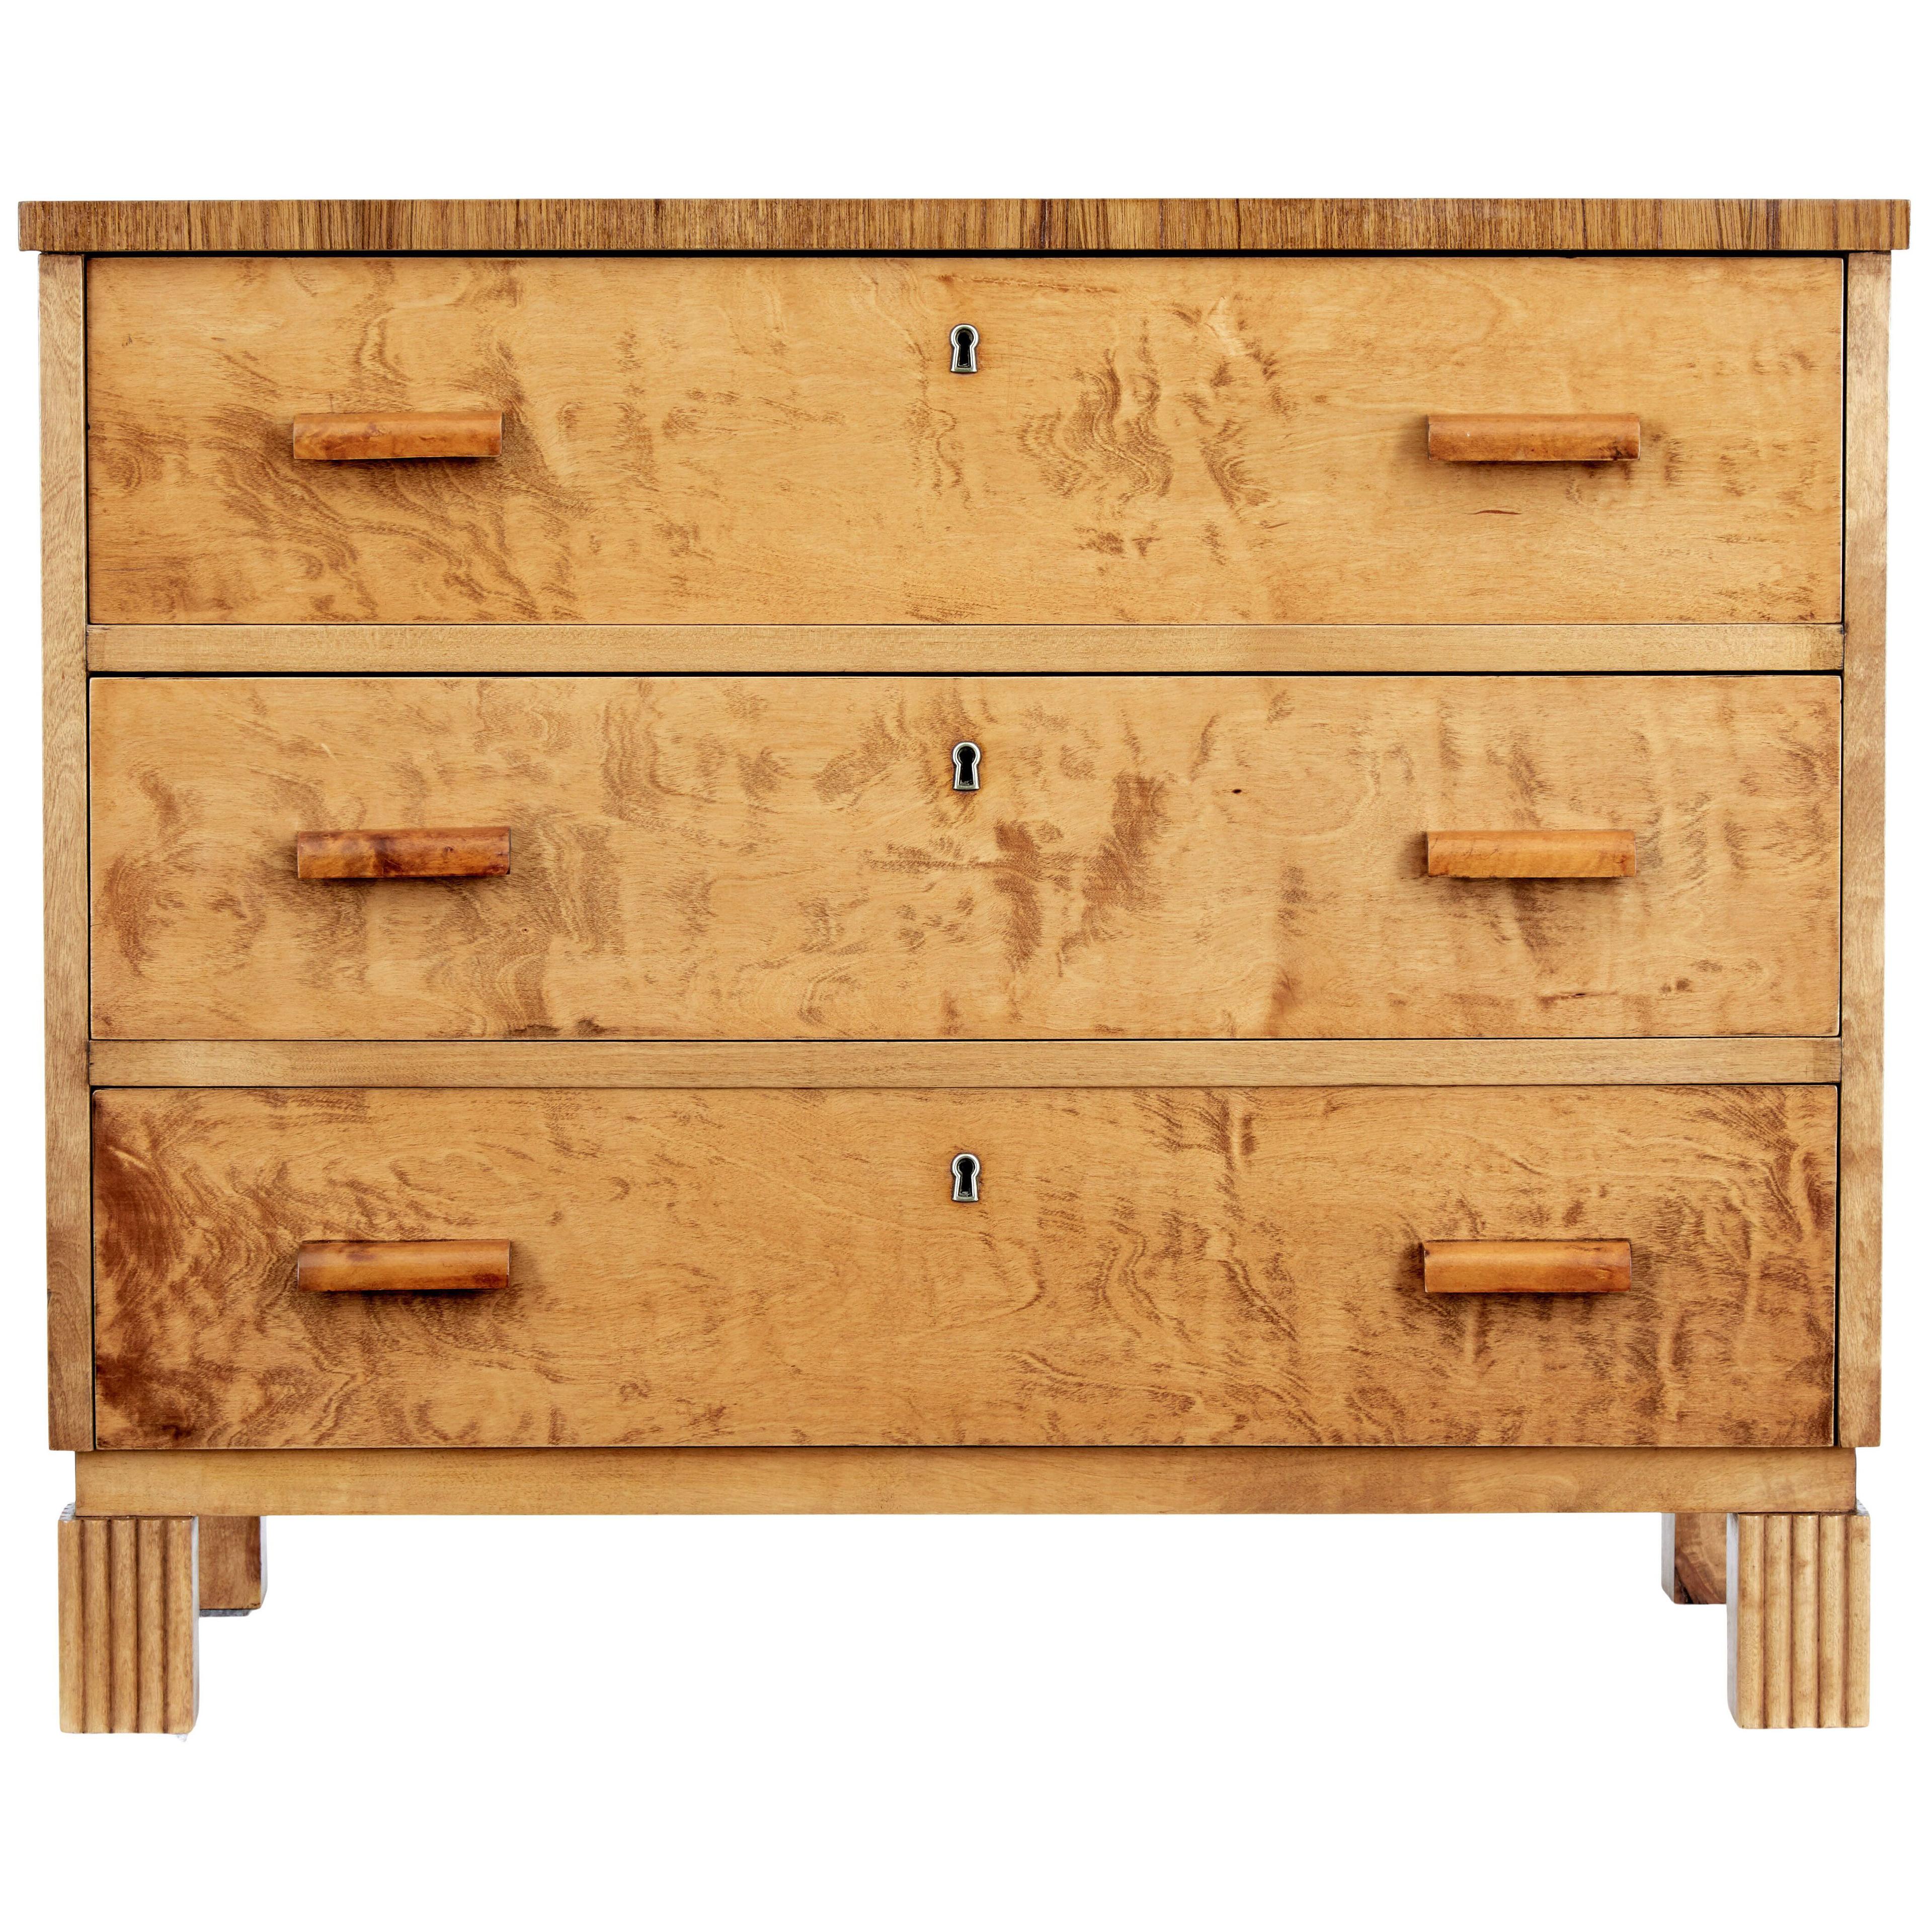 MID 20TH CENTURY BIRCH CHEST OF DRAWERS AXEL LARSSON